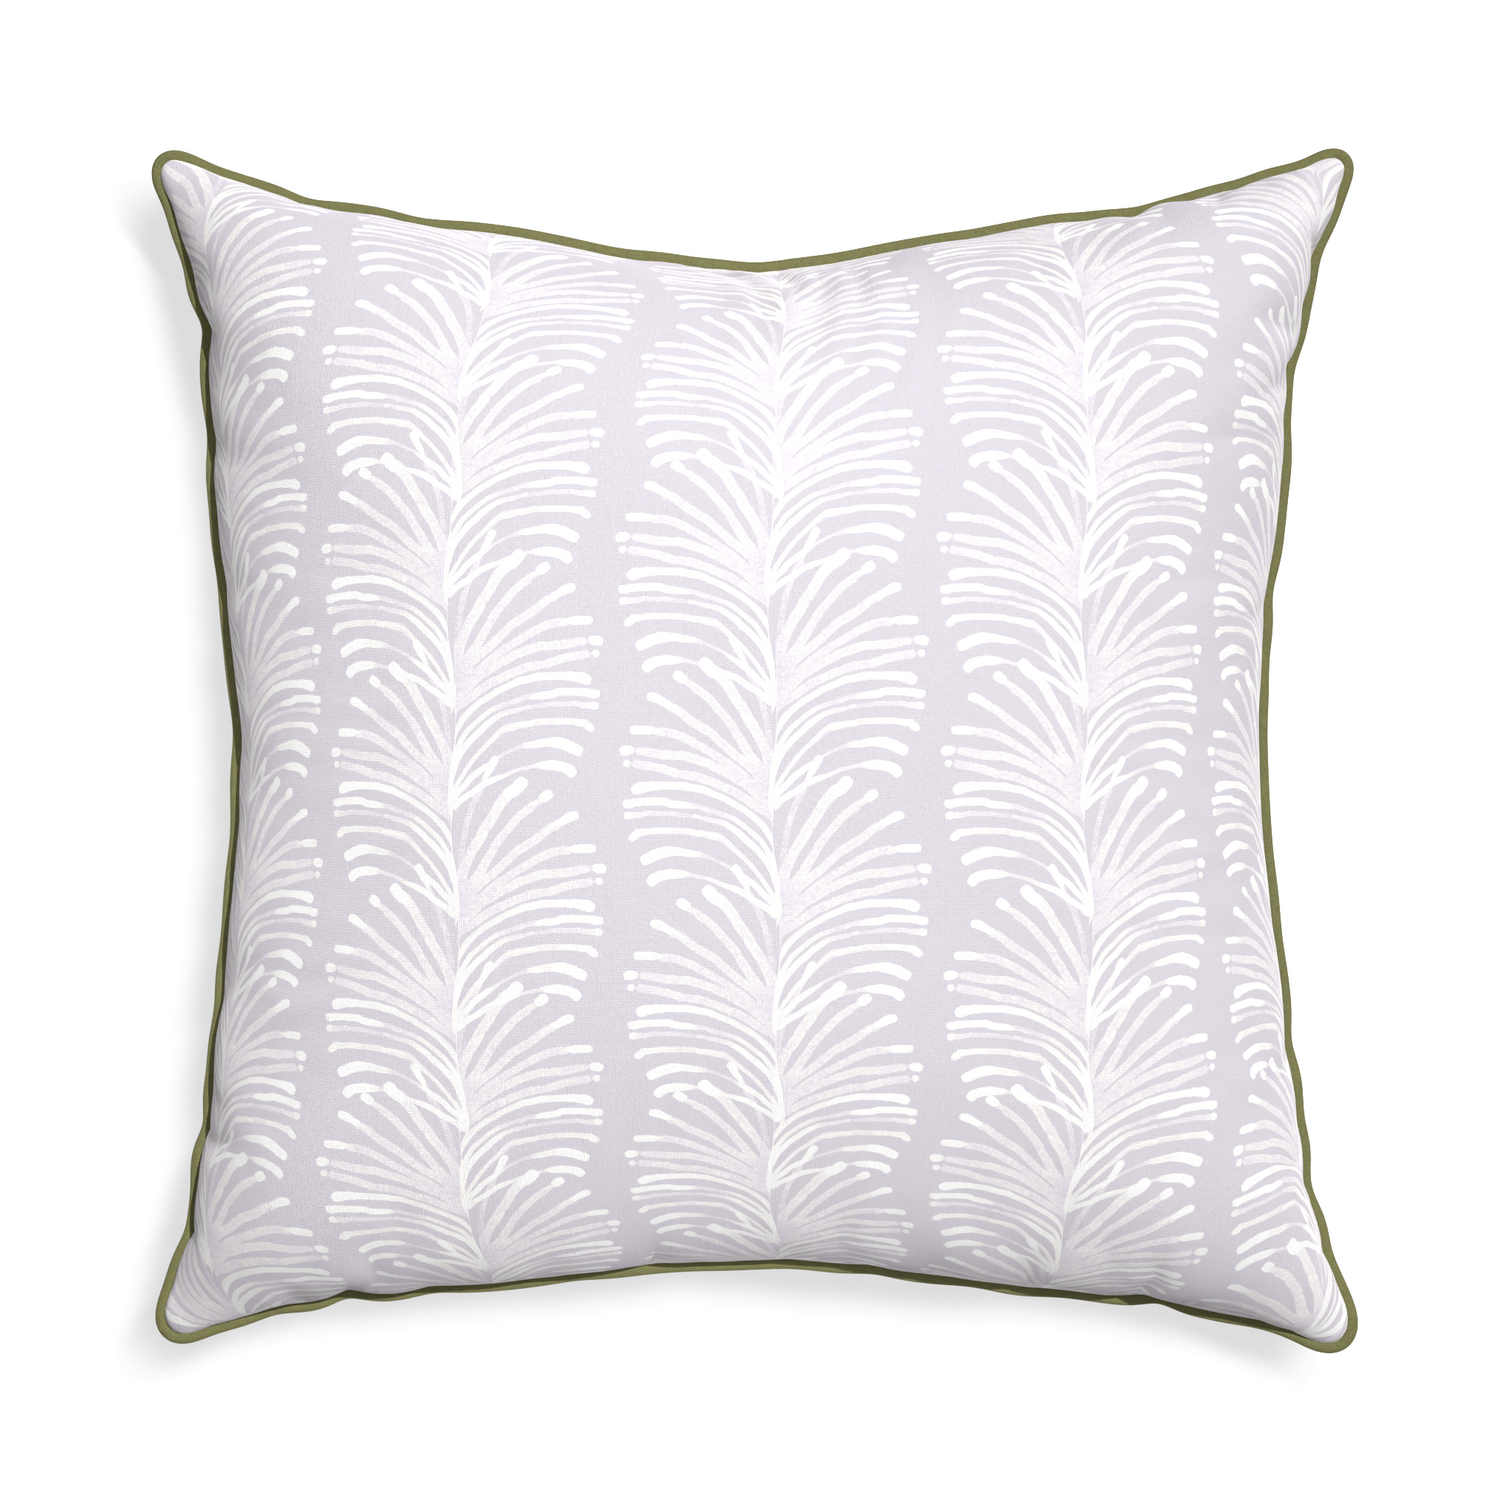 Euro-sham emma lavender custom pillow with moss piping on white background